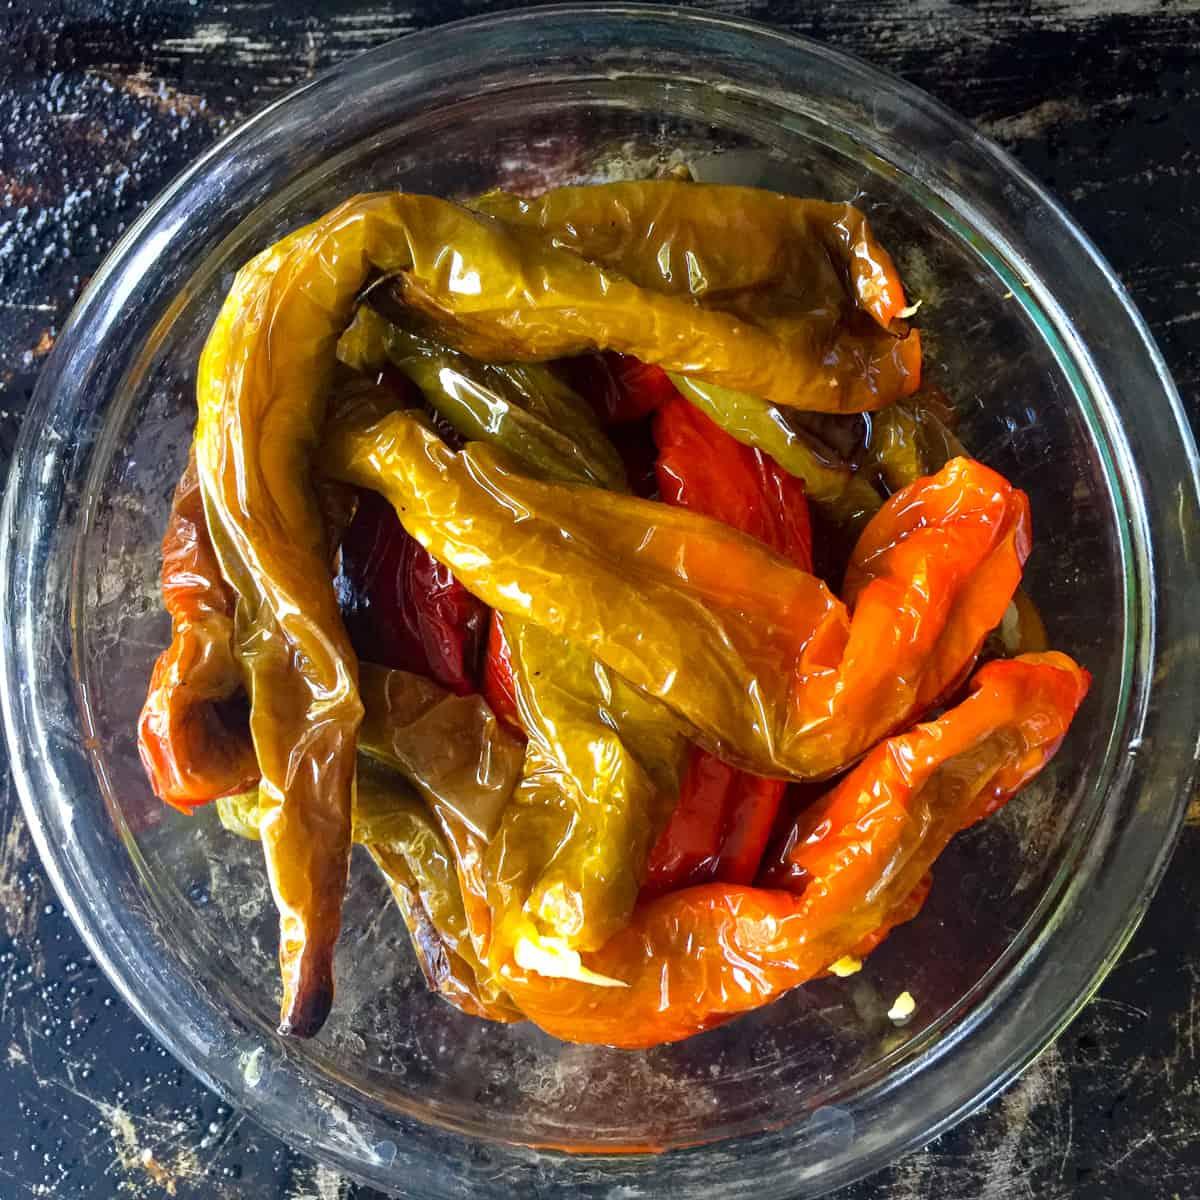 Bowl of just roasted Italian long hot peppers